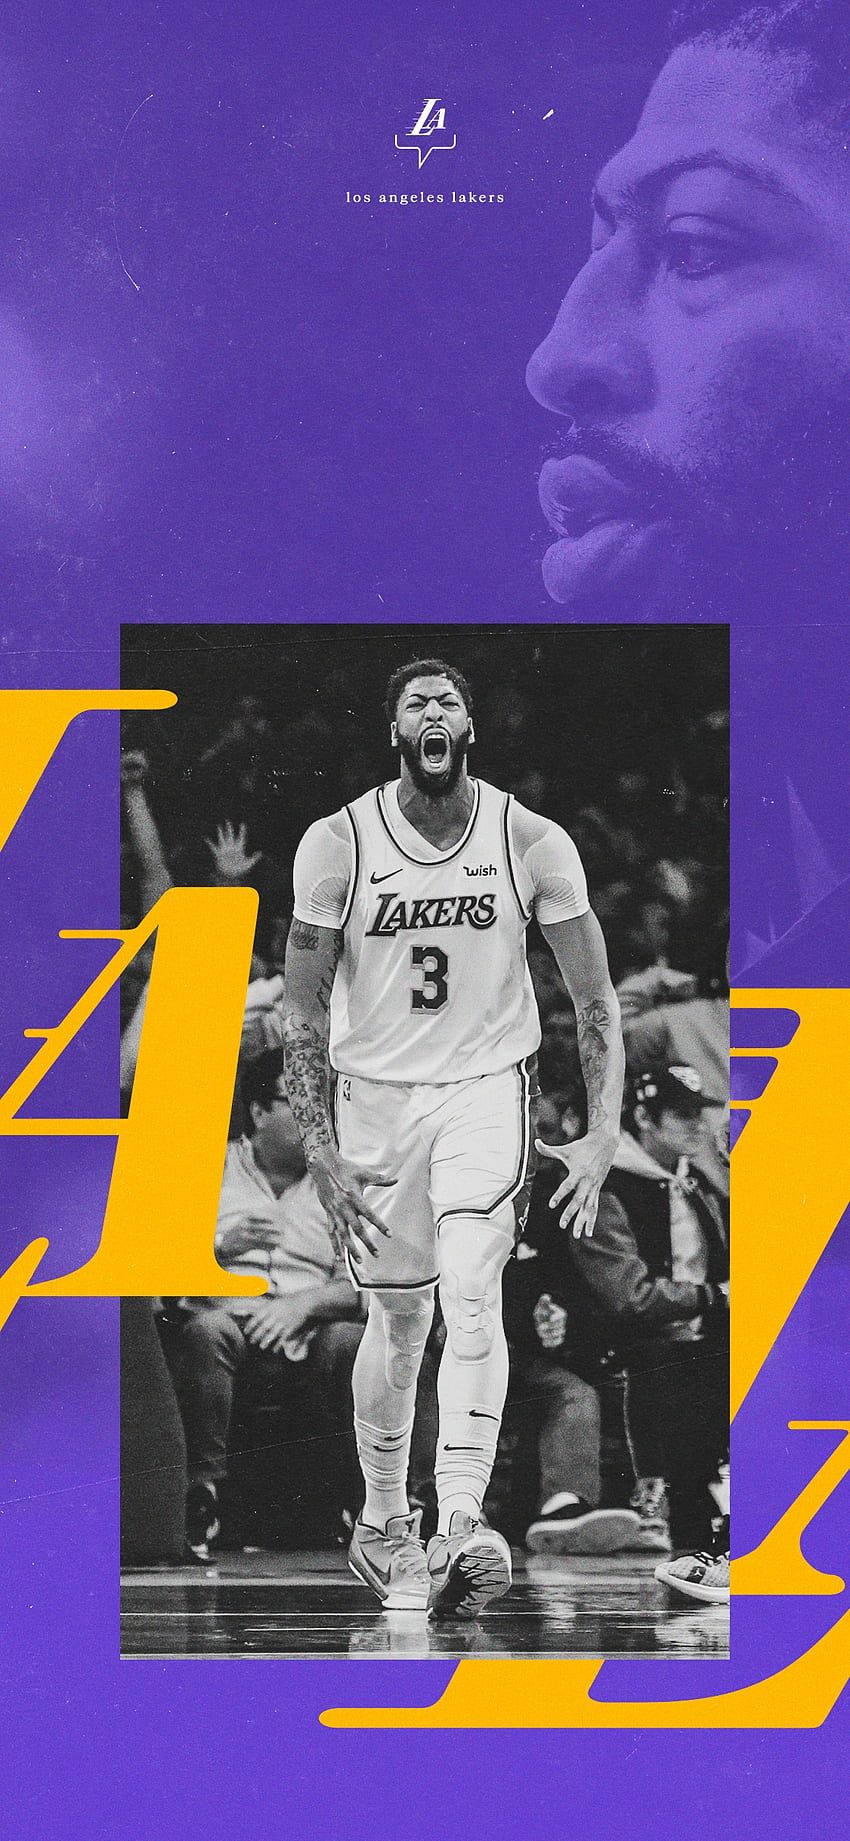 Anthony Davis wallpaper for mobile devices. #lakers #anthonydavis - Los Angeles Lakers